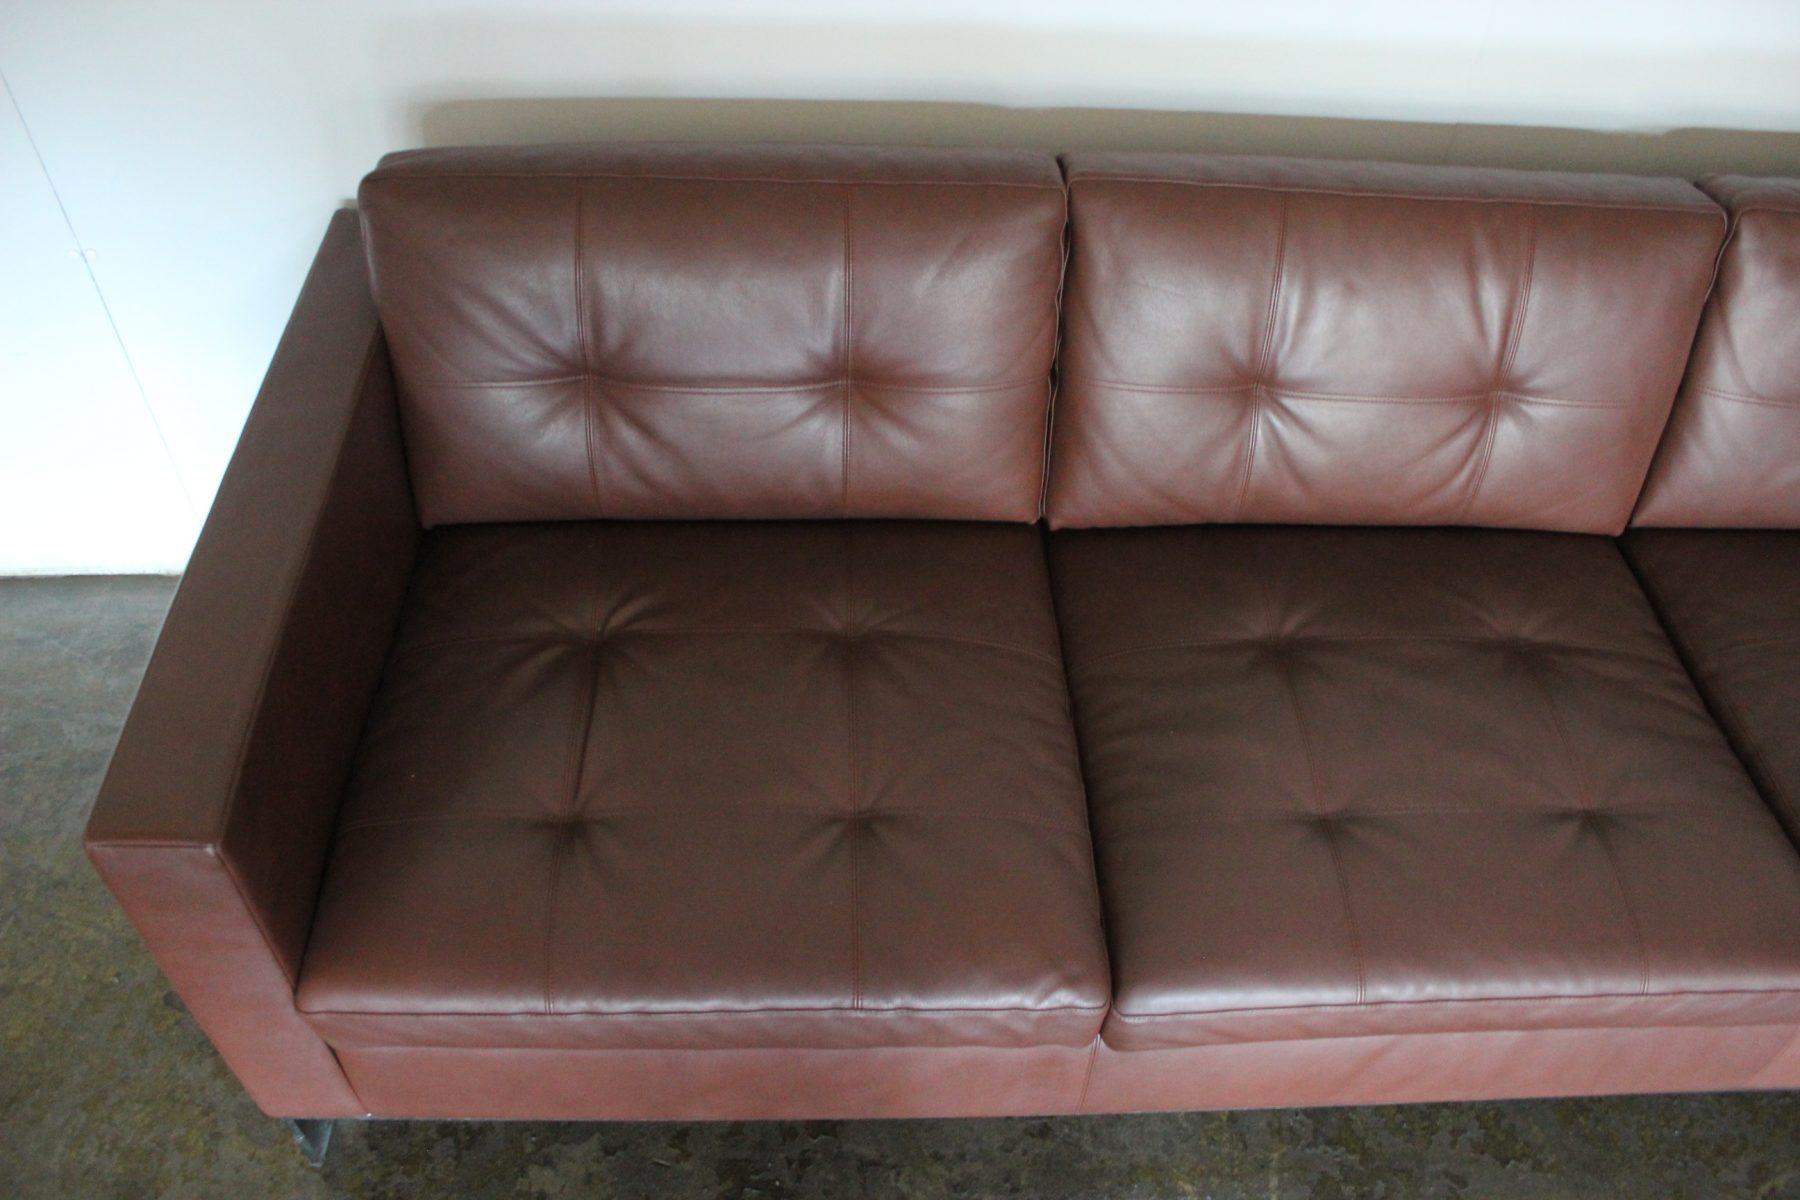 Walter Knoll “Foster 502.30” 3-Seat Sofa – In Dark Brown Leather For Sale 3